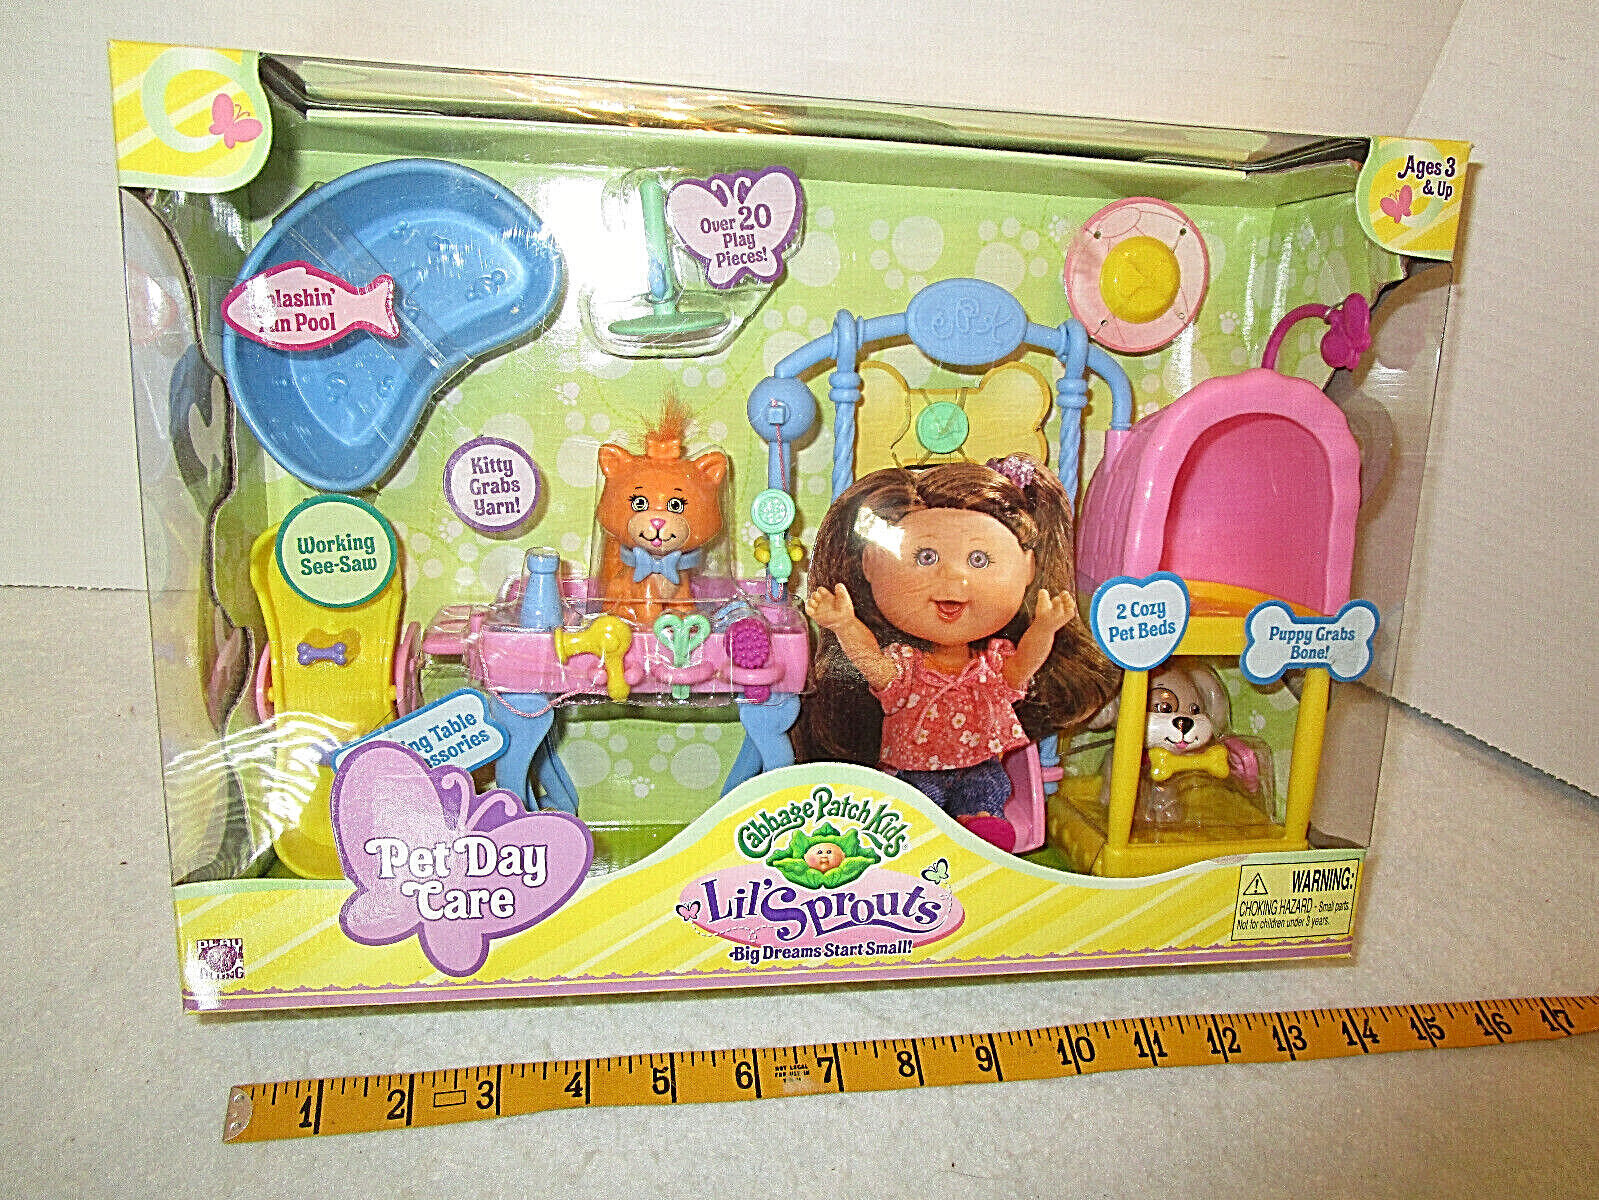 Cabbage Patch Pet Day Care Playset NIB for your 5" dolls and Lil Sprouts - $18.99